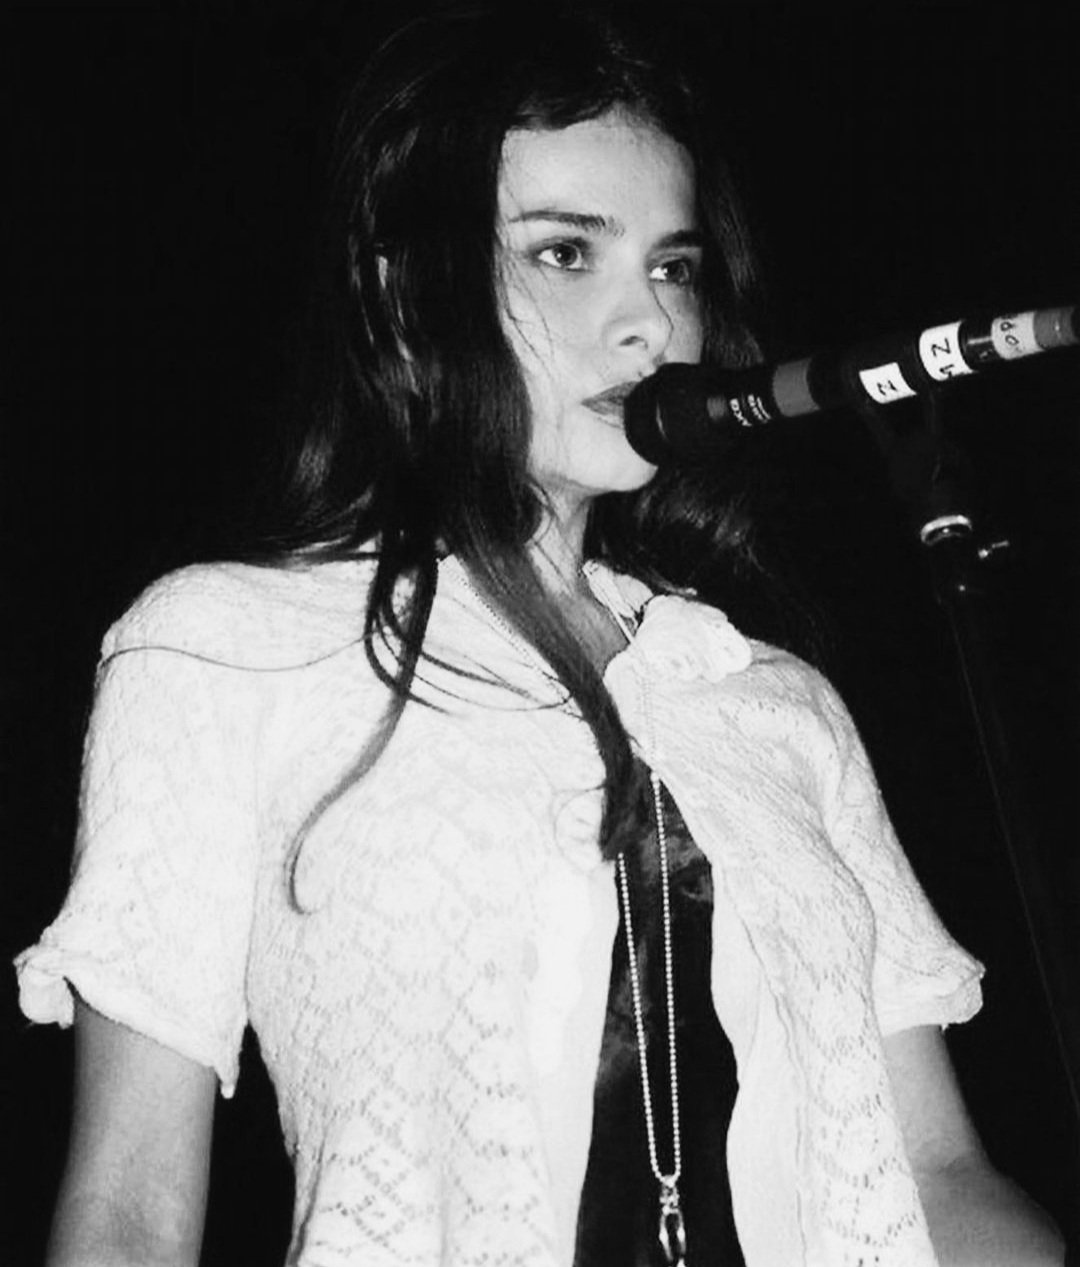  Happy Birthday to my fave, Hope Sandoval of Mazzy Star 